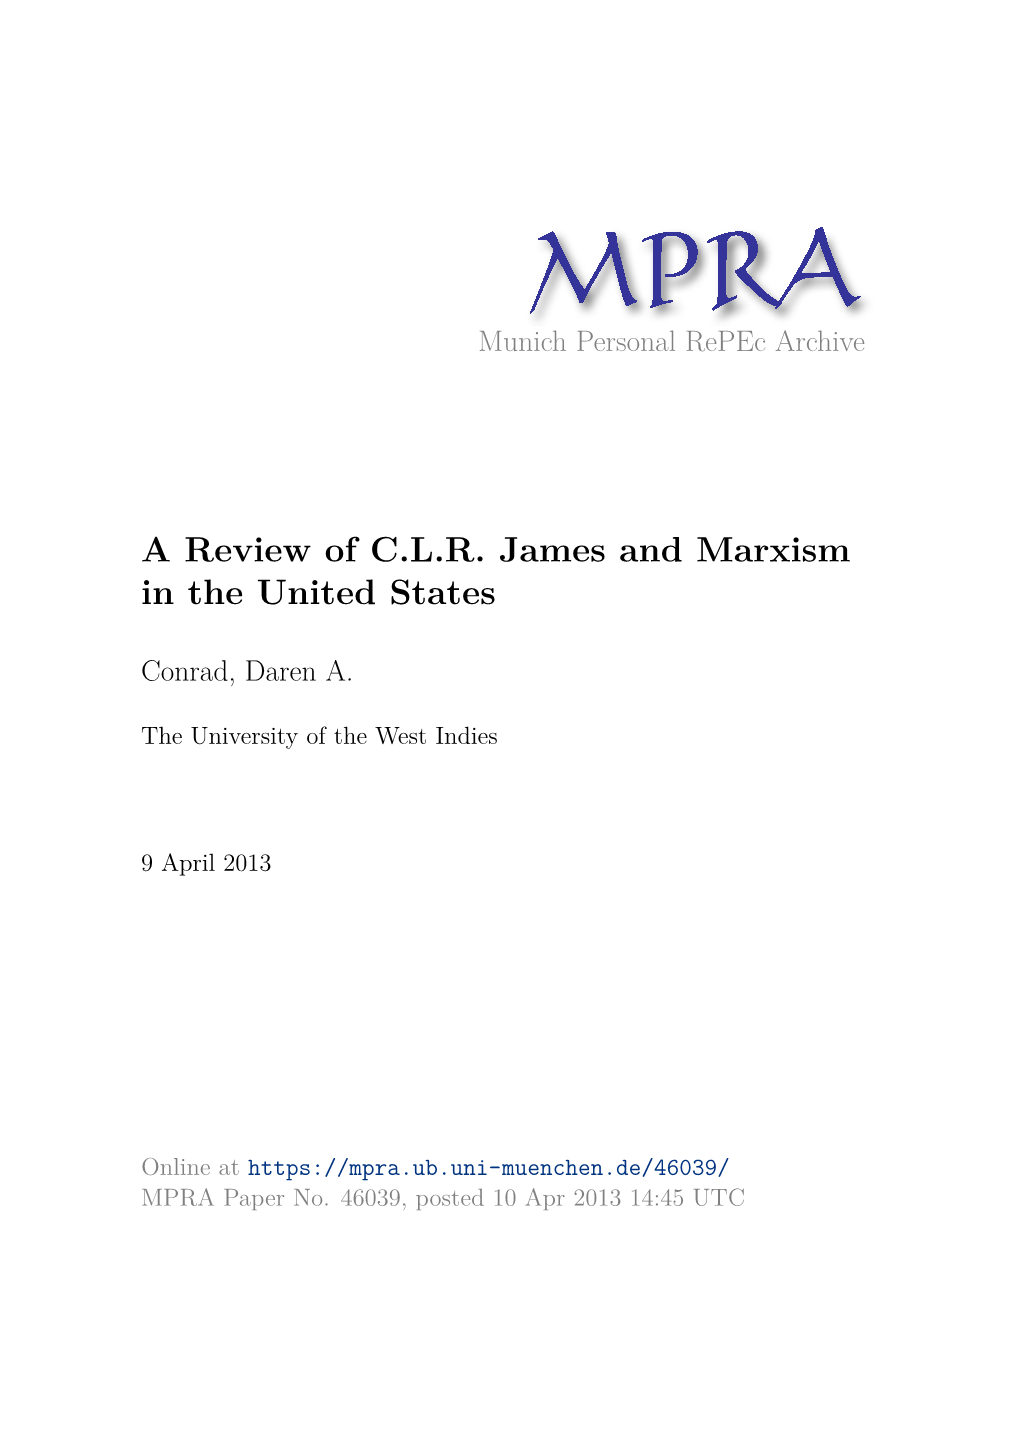 A Review of C.L.R. James and Marxism in the United States